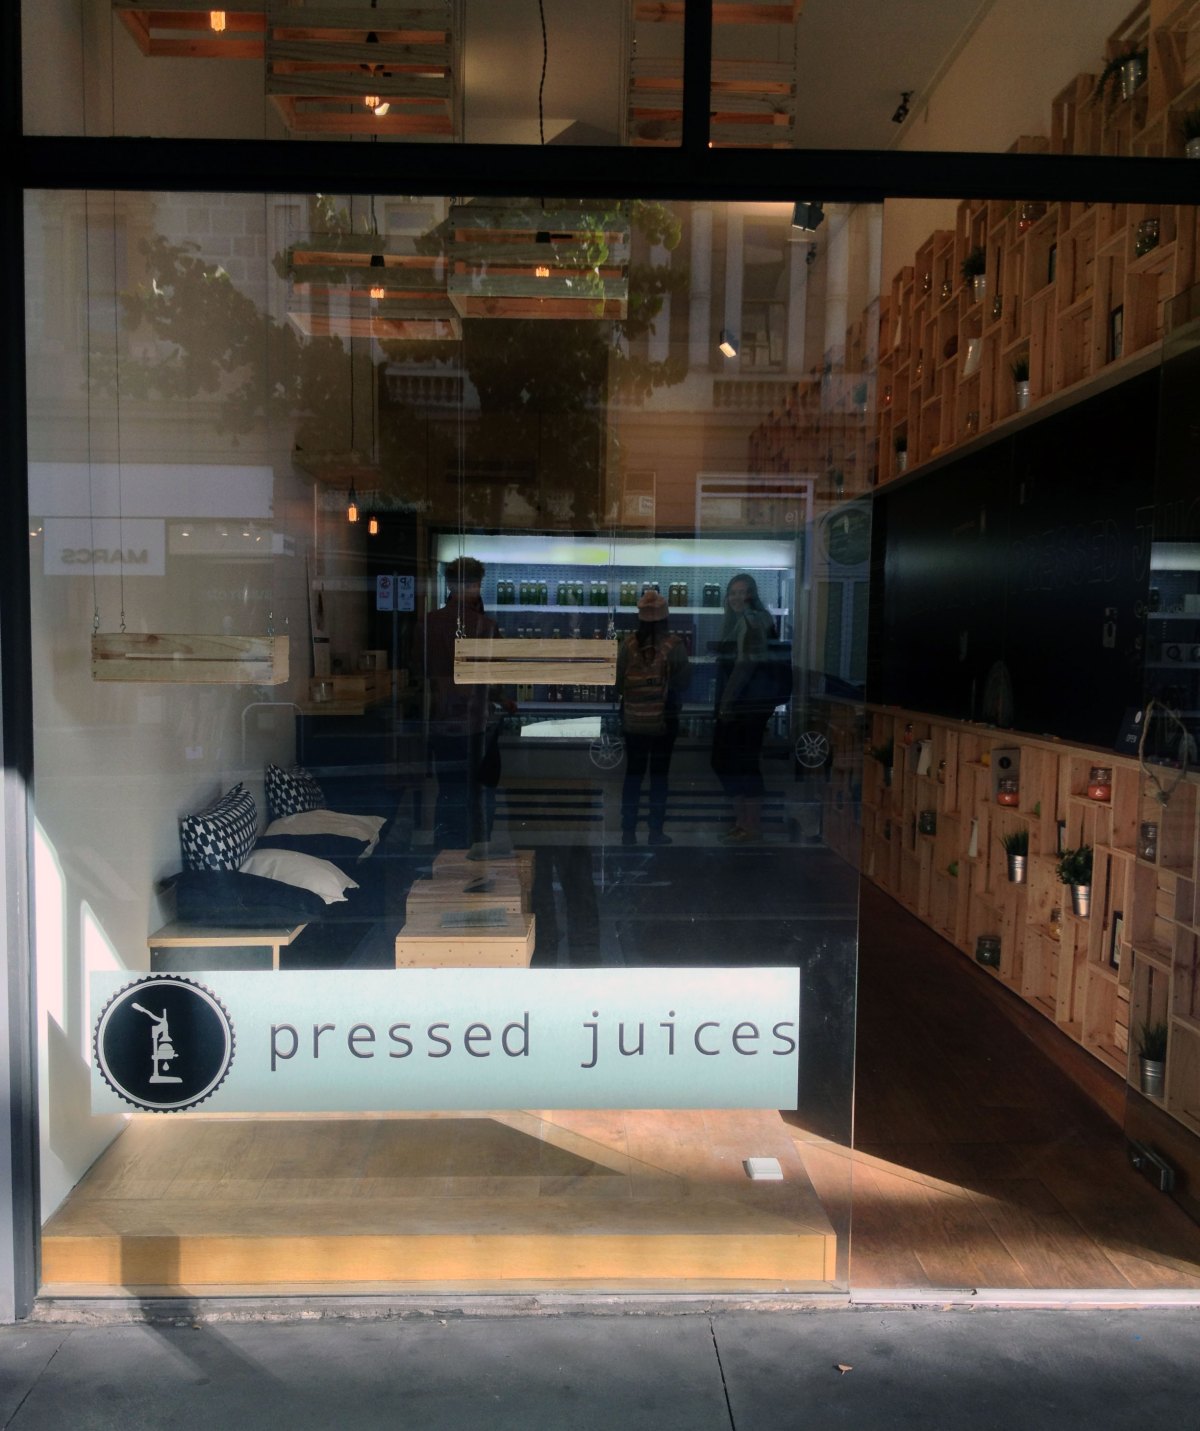 The Pressed Juices store in Rundle St.